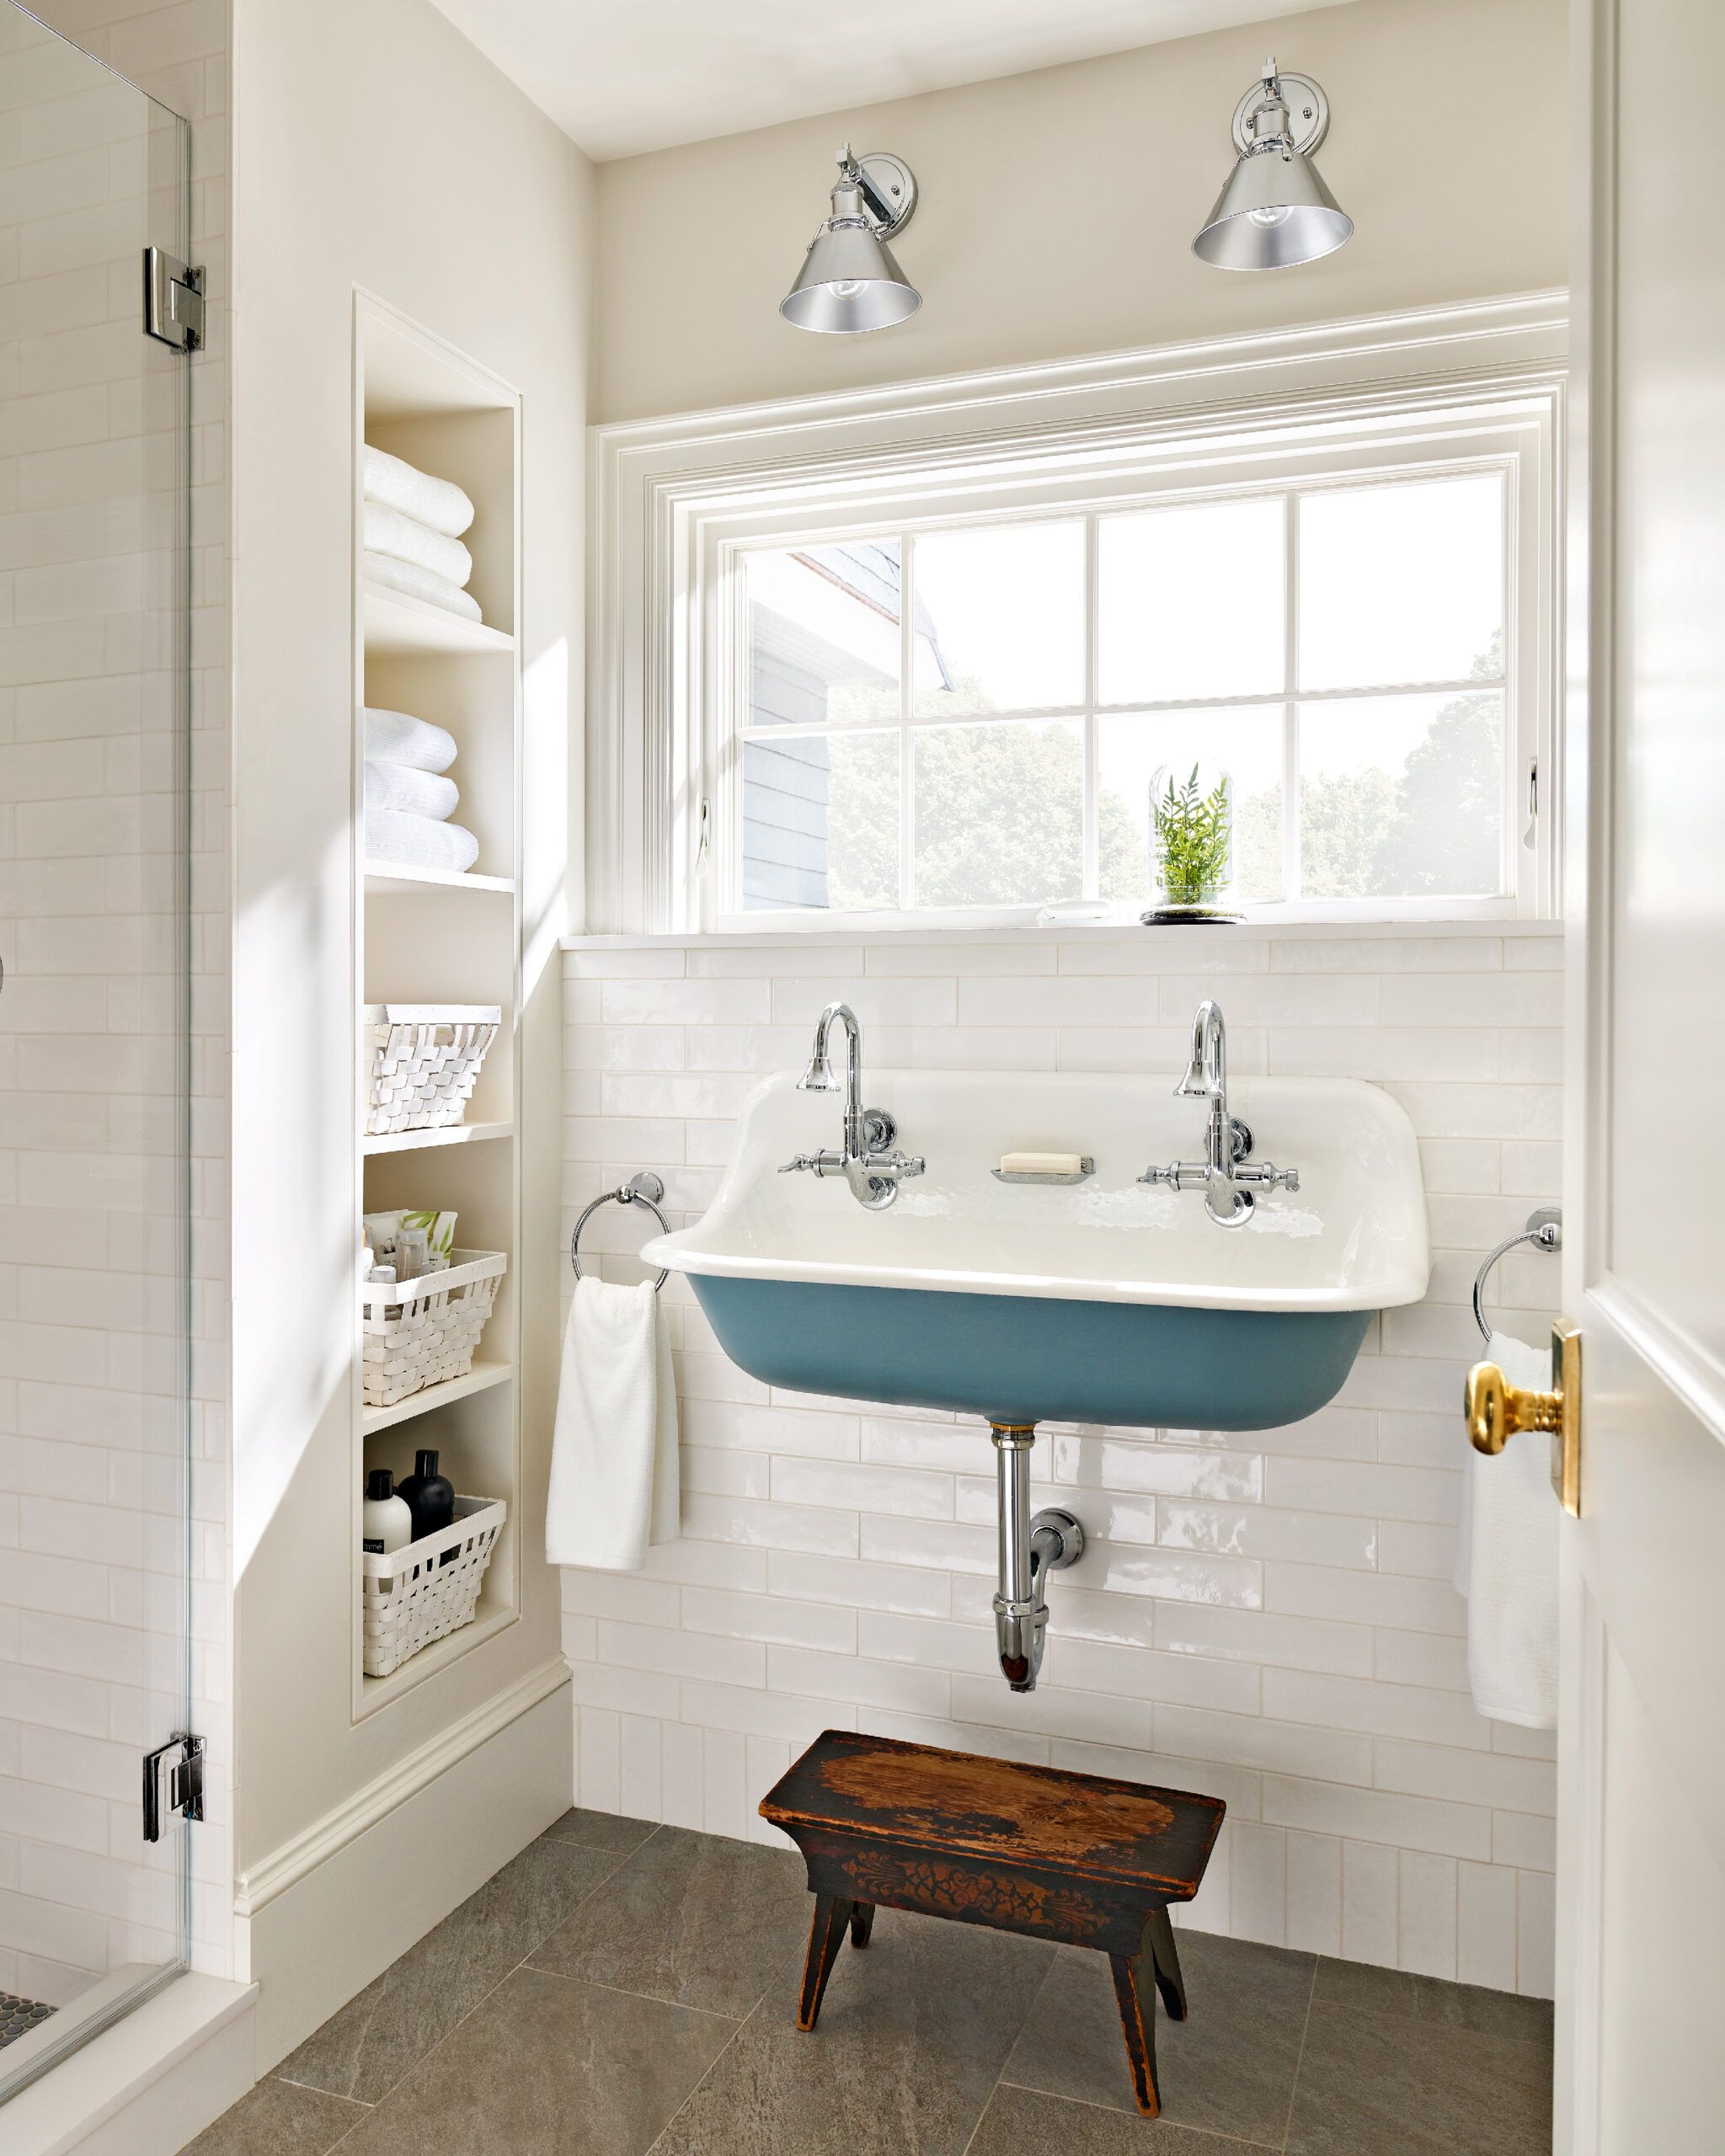 A small bathroom with a large window